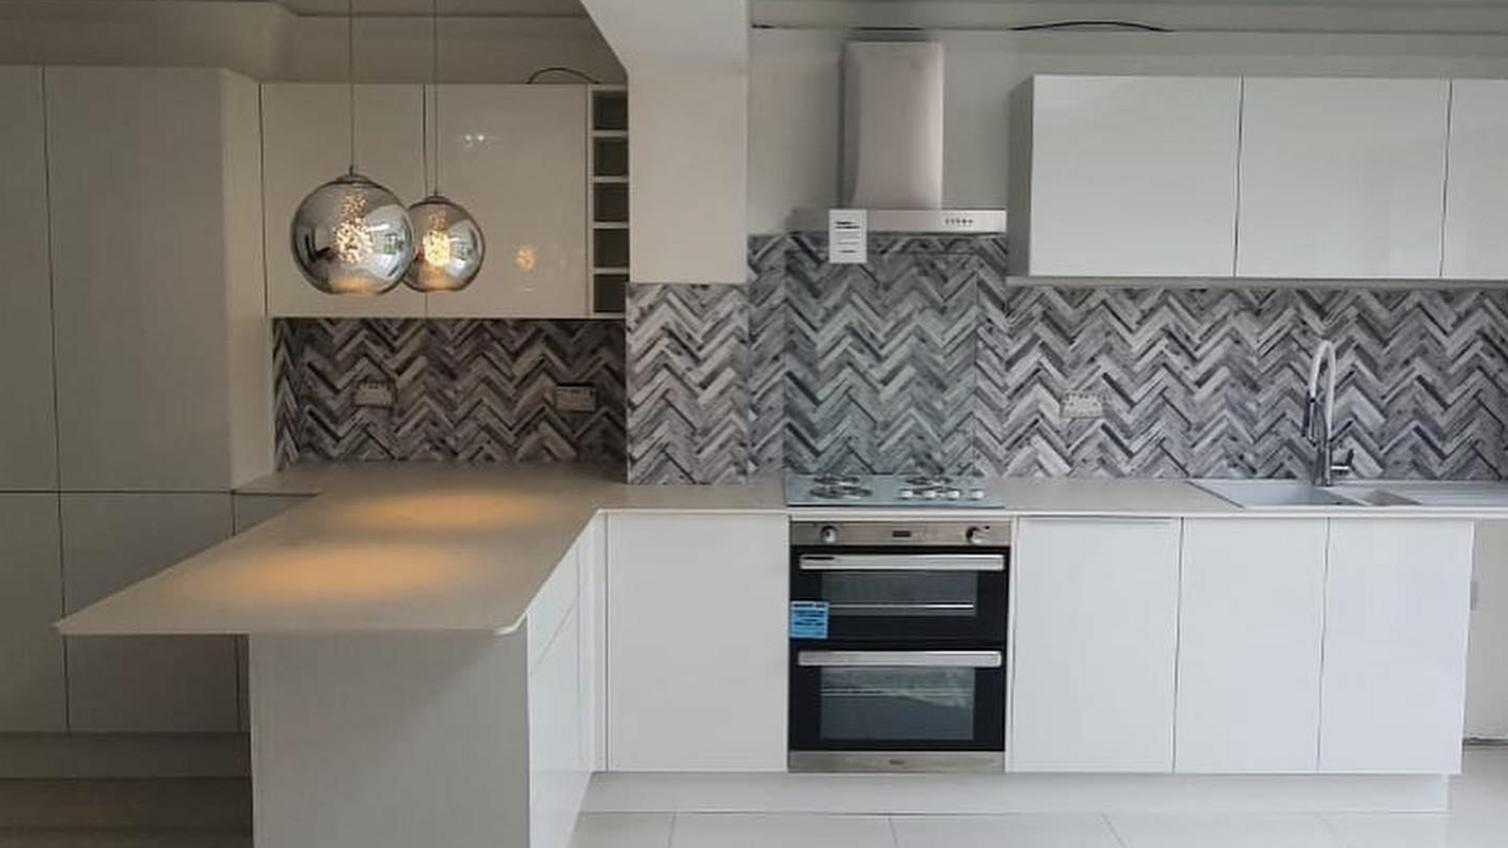 A large white kitchen idea with slab cupboards. Includes a silver chimney cooker hood, and a herringbone-effect backboard.